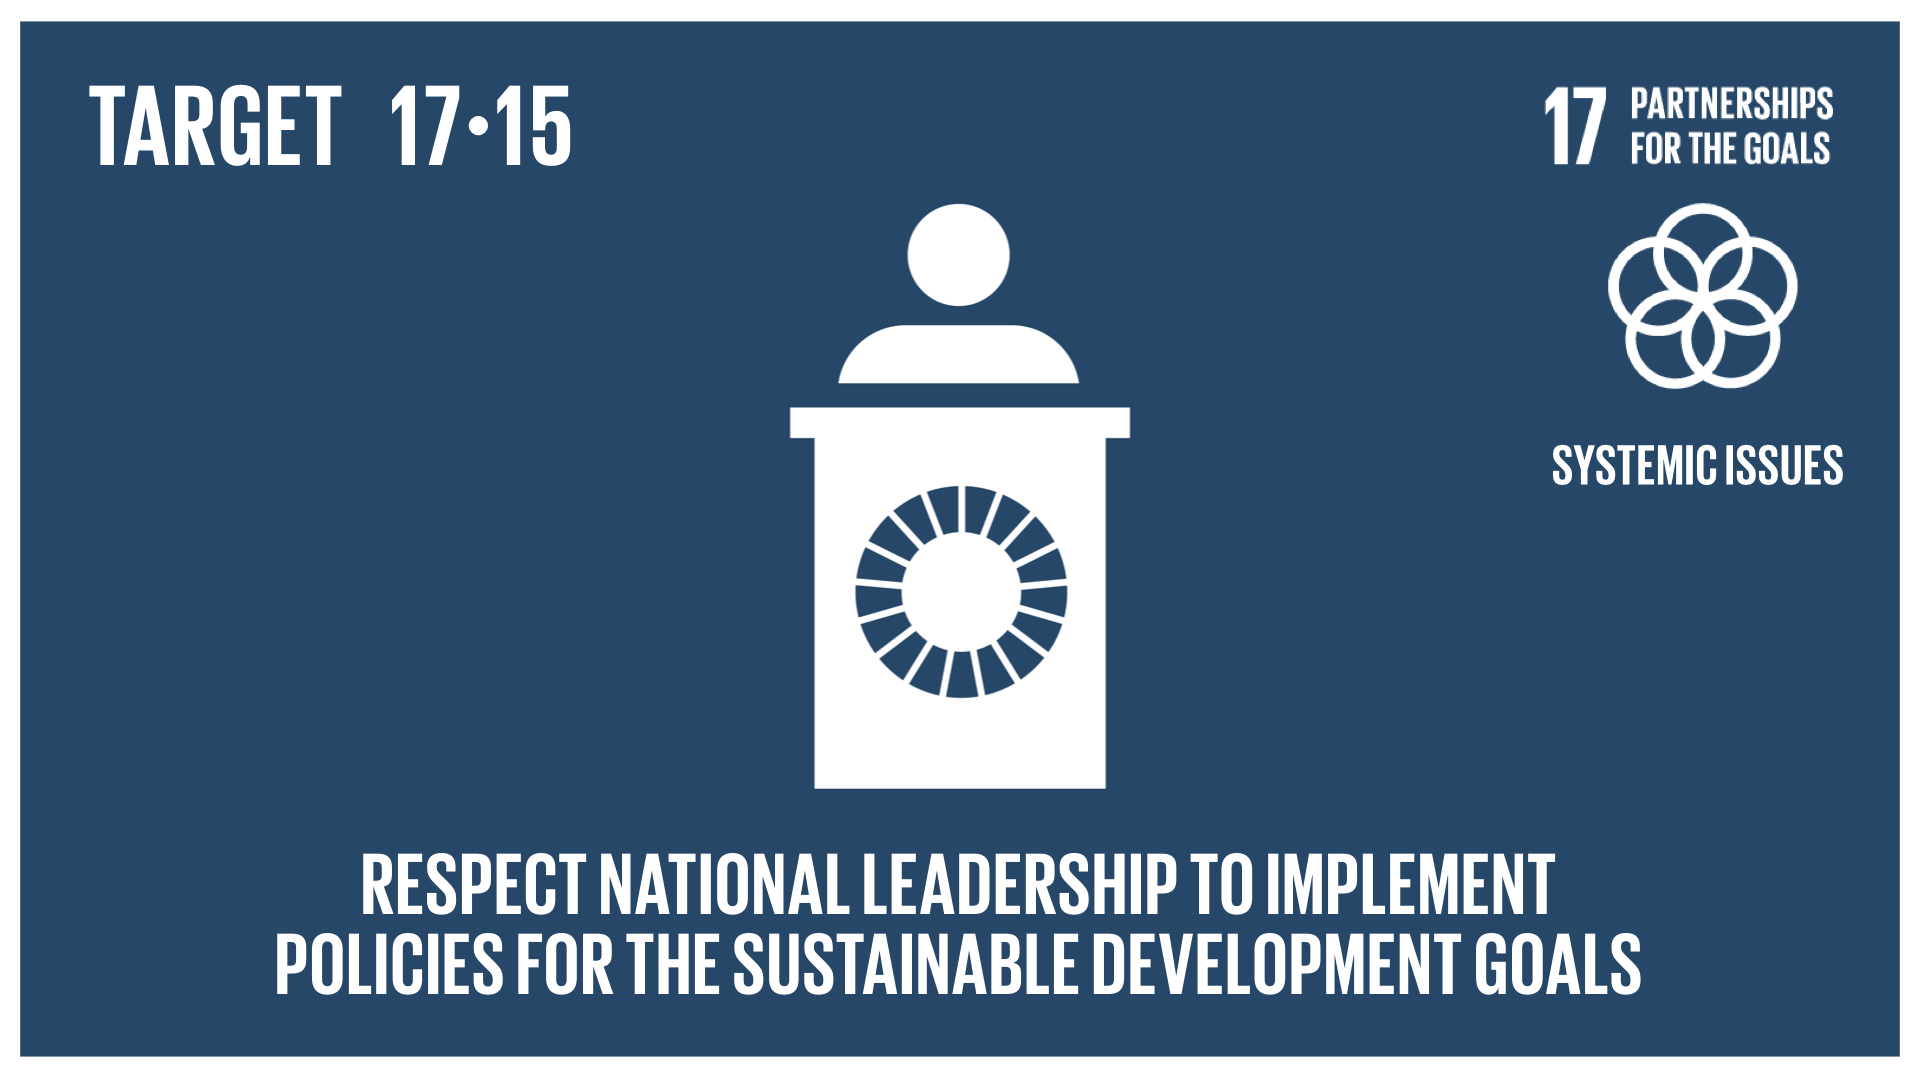 Graphic displaying respect for national leadership in implementing policies for the SDGs